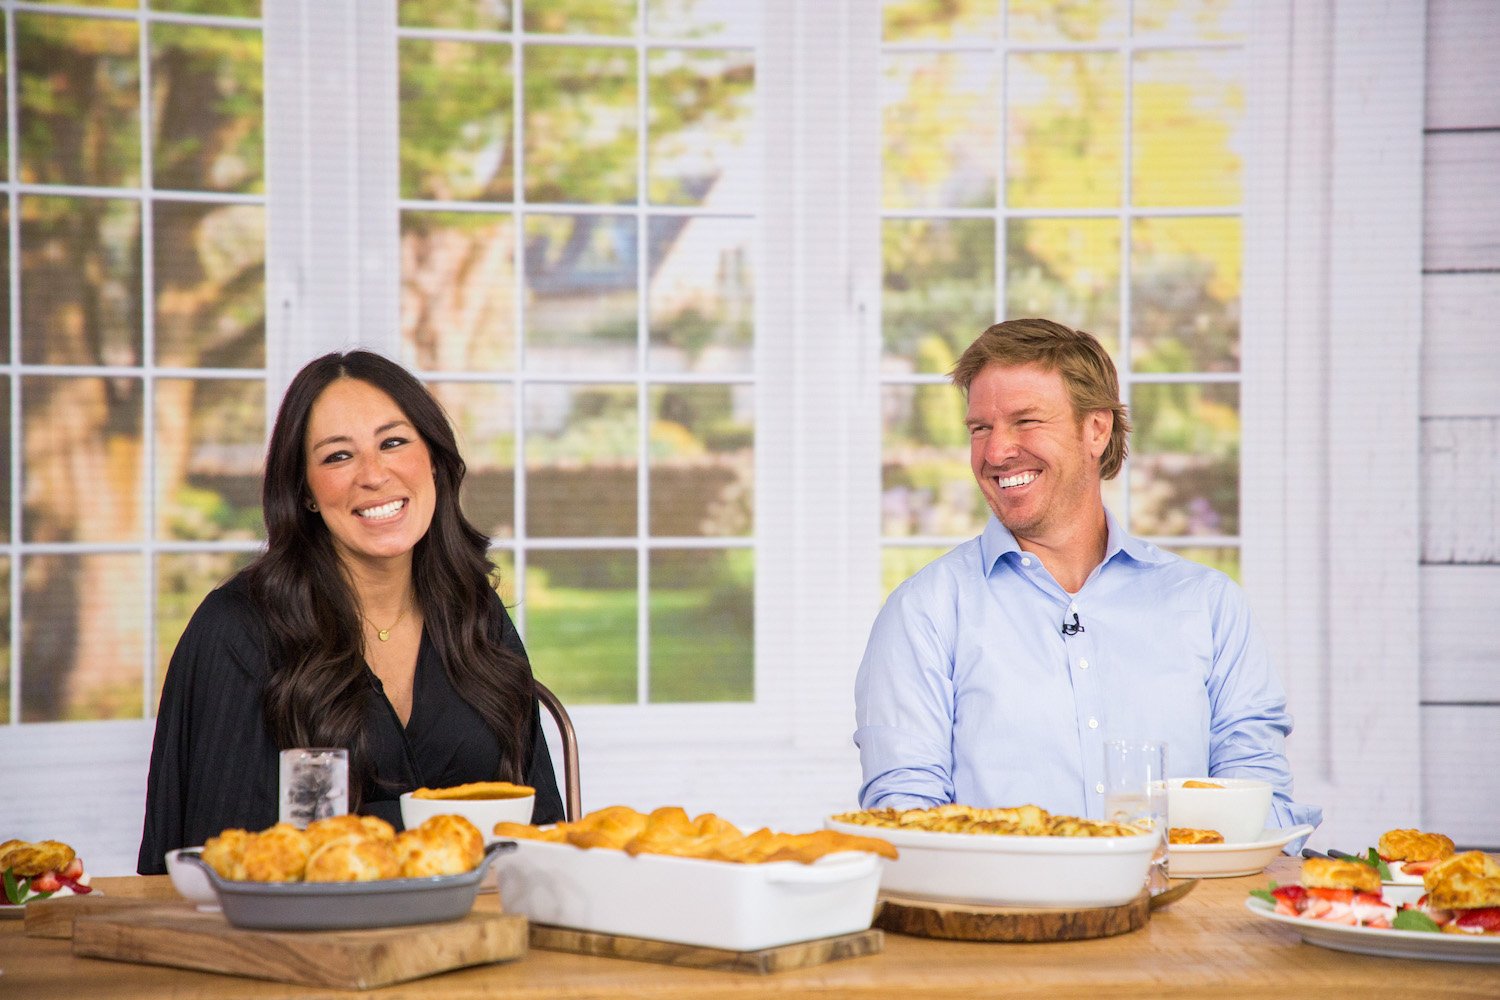 Joanna Gaines and Chip Gaines sitting at a dinner table smiling